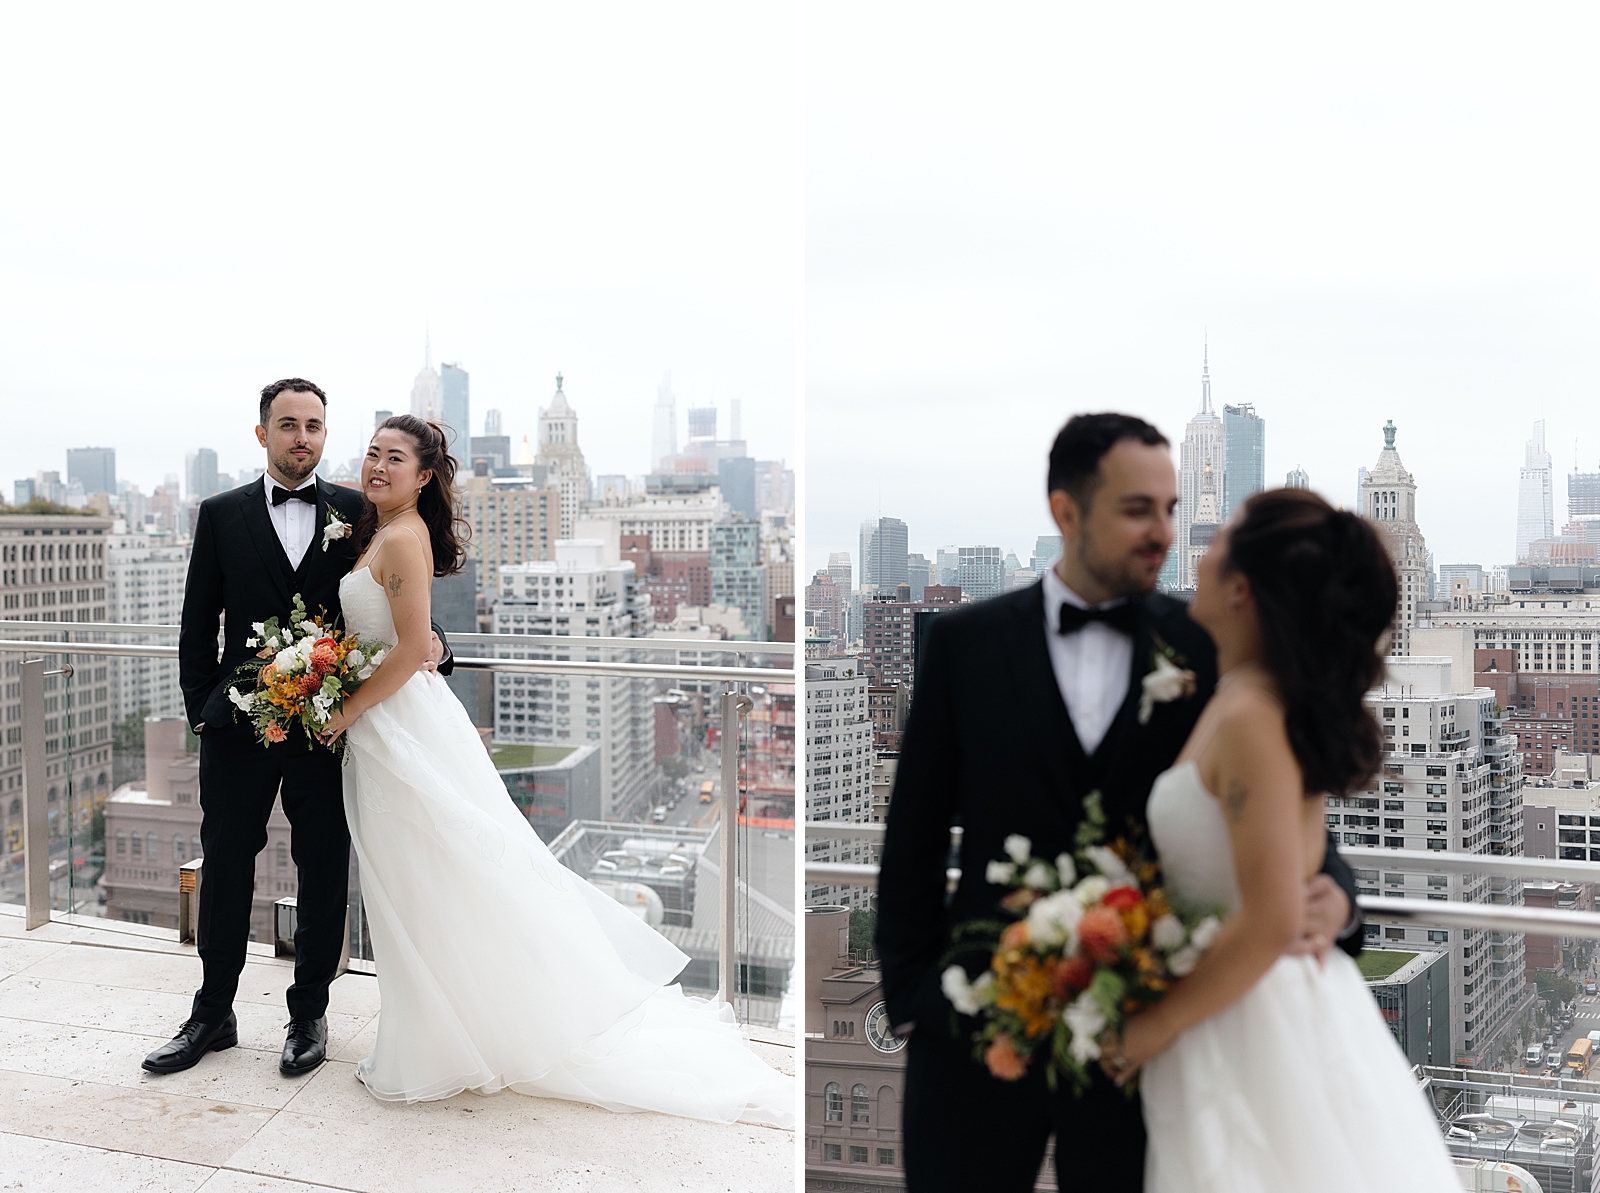 Left photo: Shot of the bride and groom on a rooftop smiling for the camera.
Right photo: Up close shot of the bride and groom smiling at each other as they stand on a rooftop with the New York skyline behind them. 